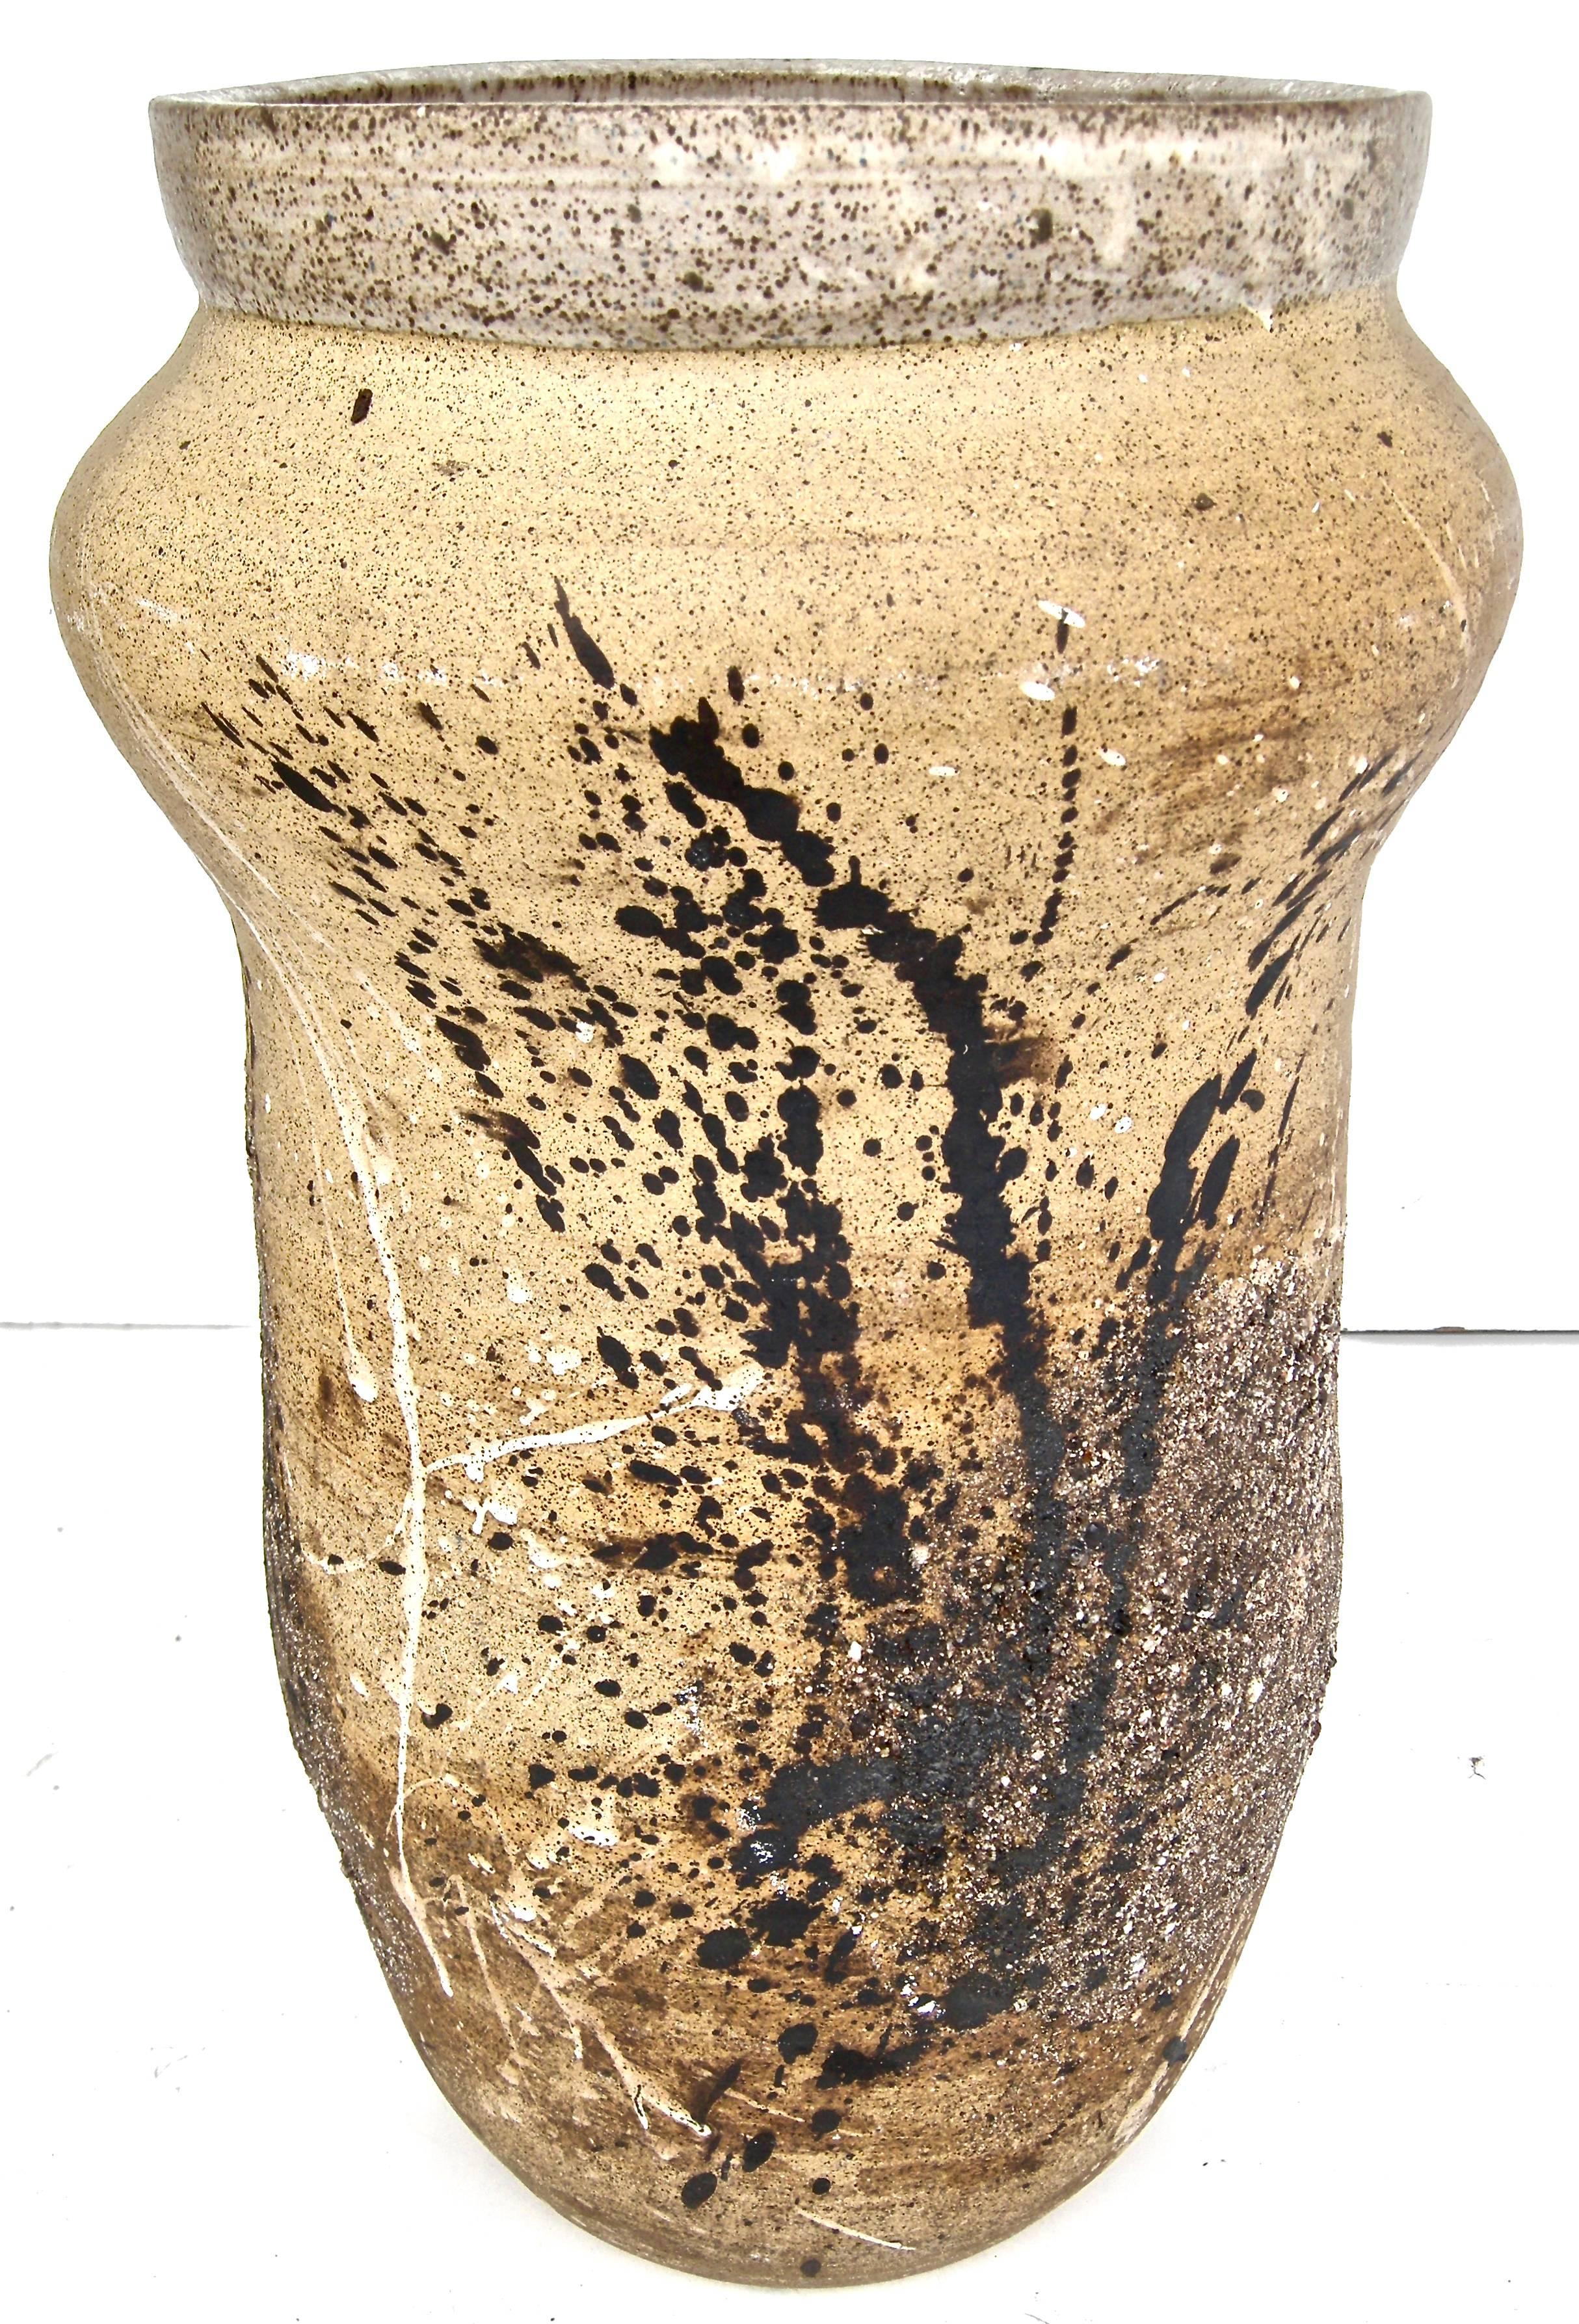 Beautiful large-scale, handcrafted/thrown, Mid-Century, artisan pottery vessel. Having a splattered, foliate inspired overall design and aesthetic. Soft overall earthen surface and patina.